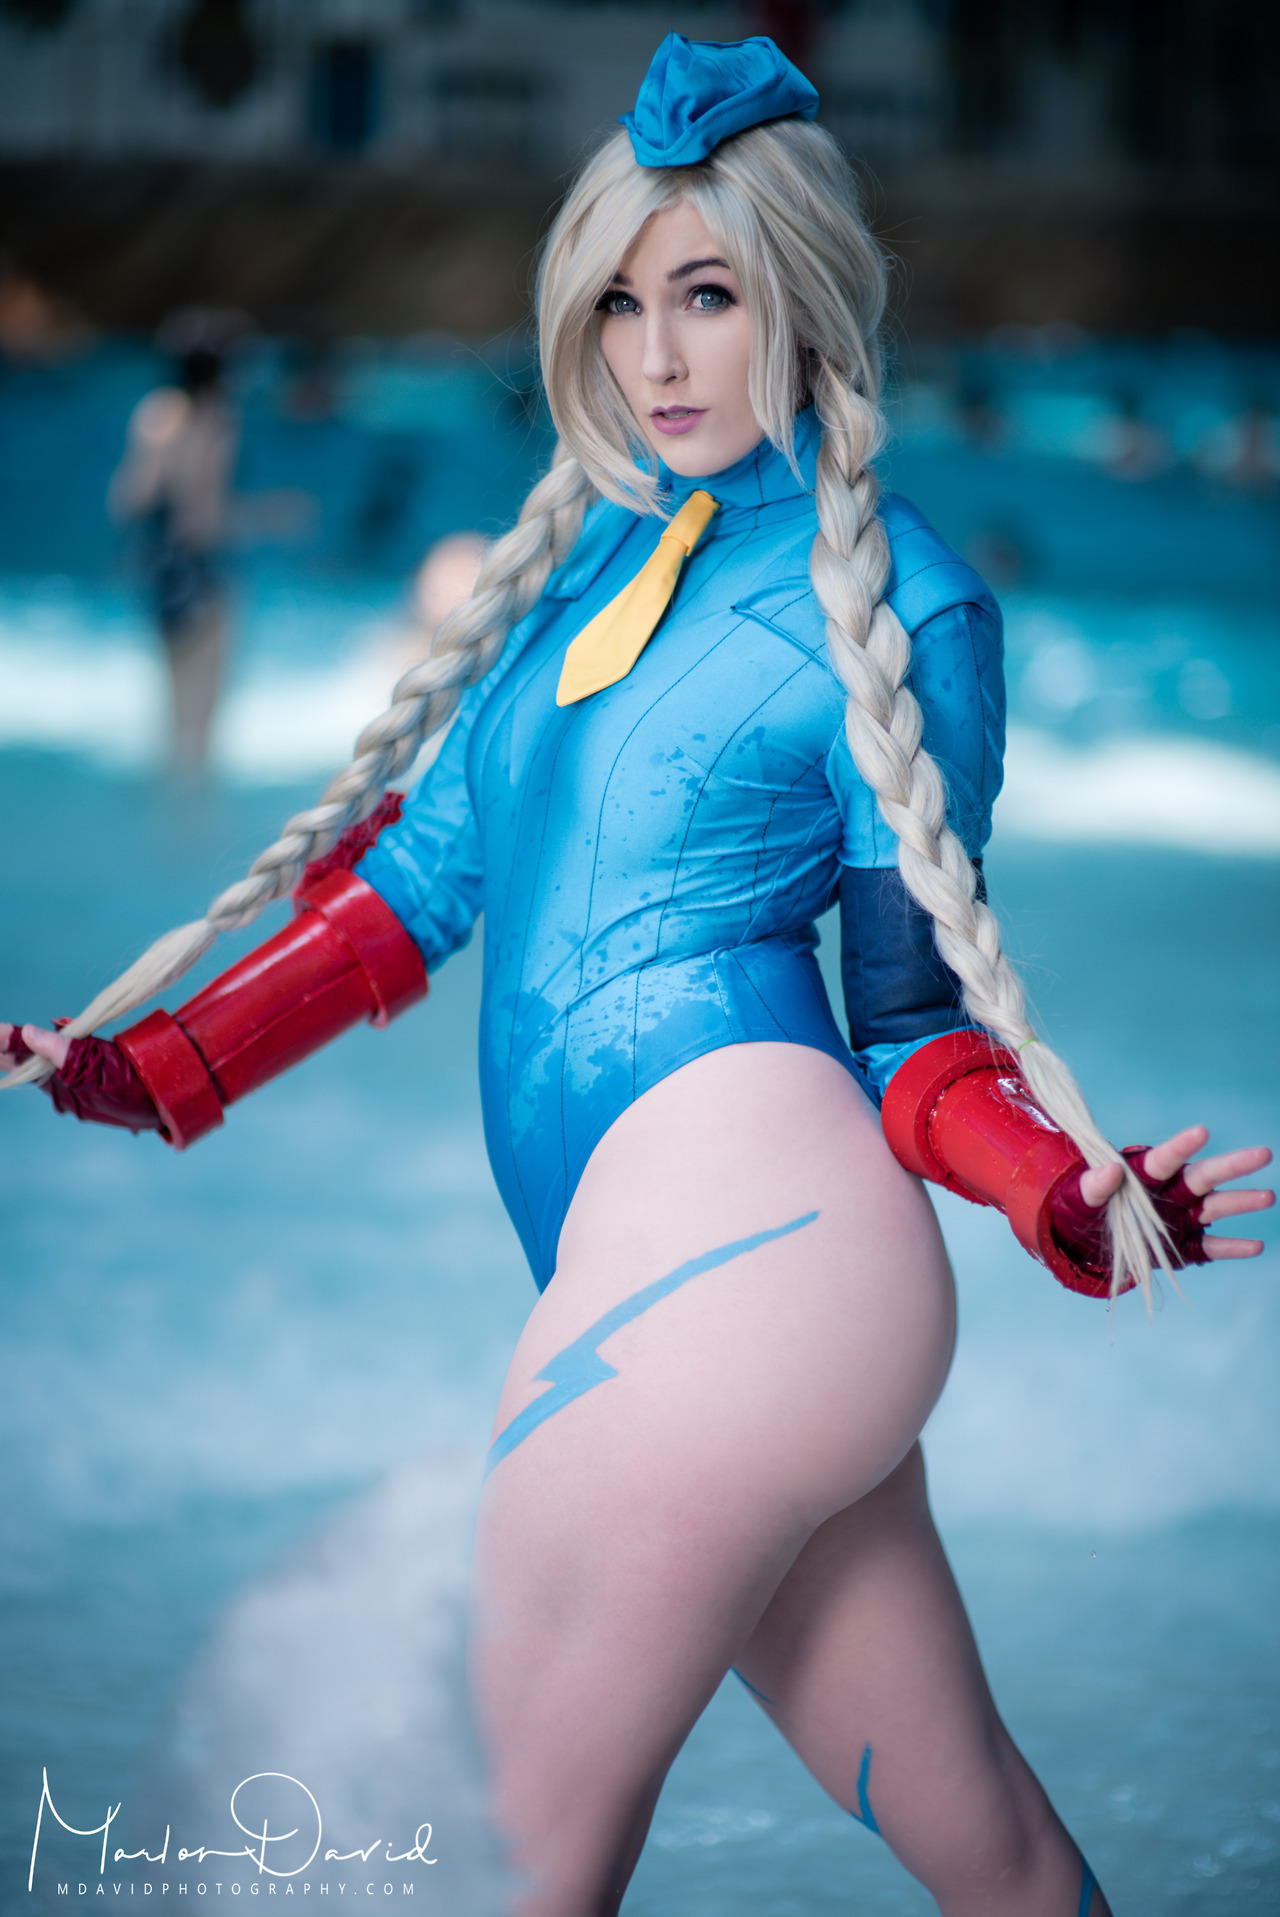 more cammy? MORE CAMMY!all photos thank to https://www.facebook.com/mdavidphotography/ you